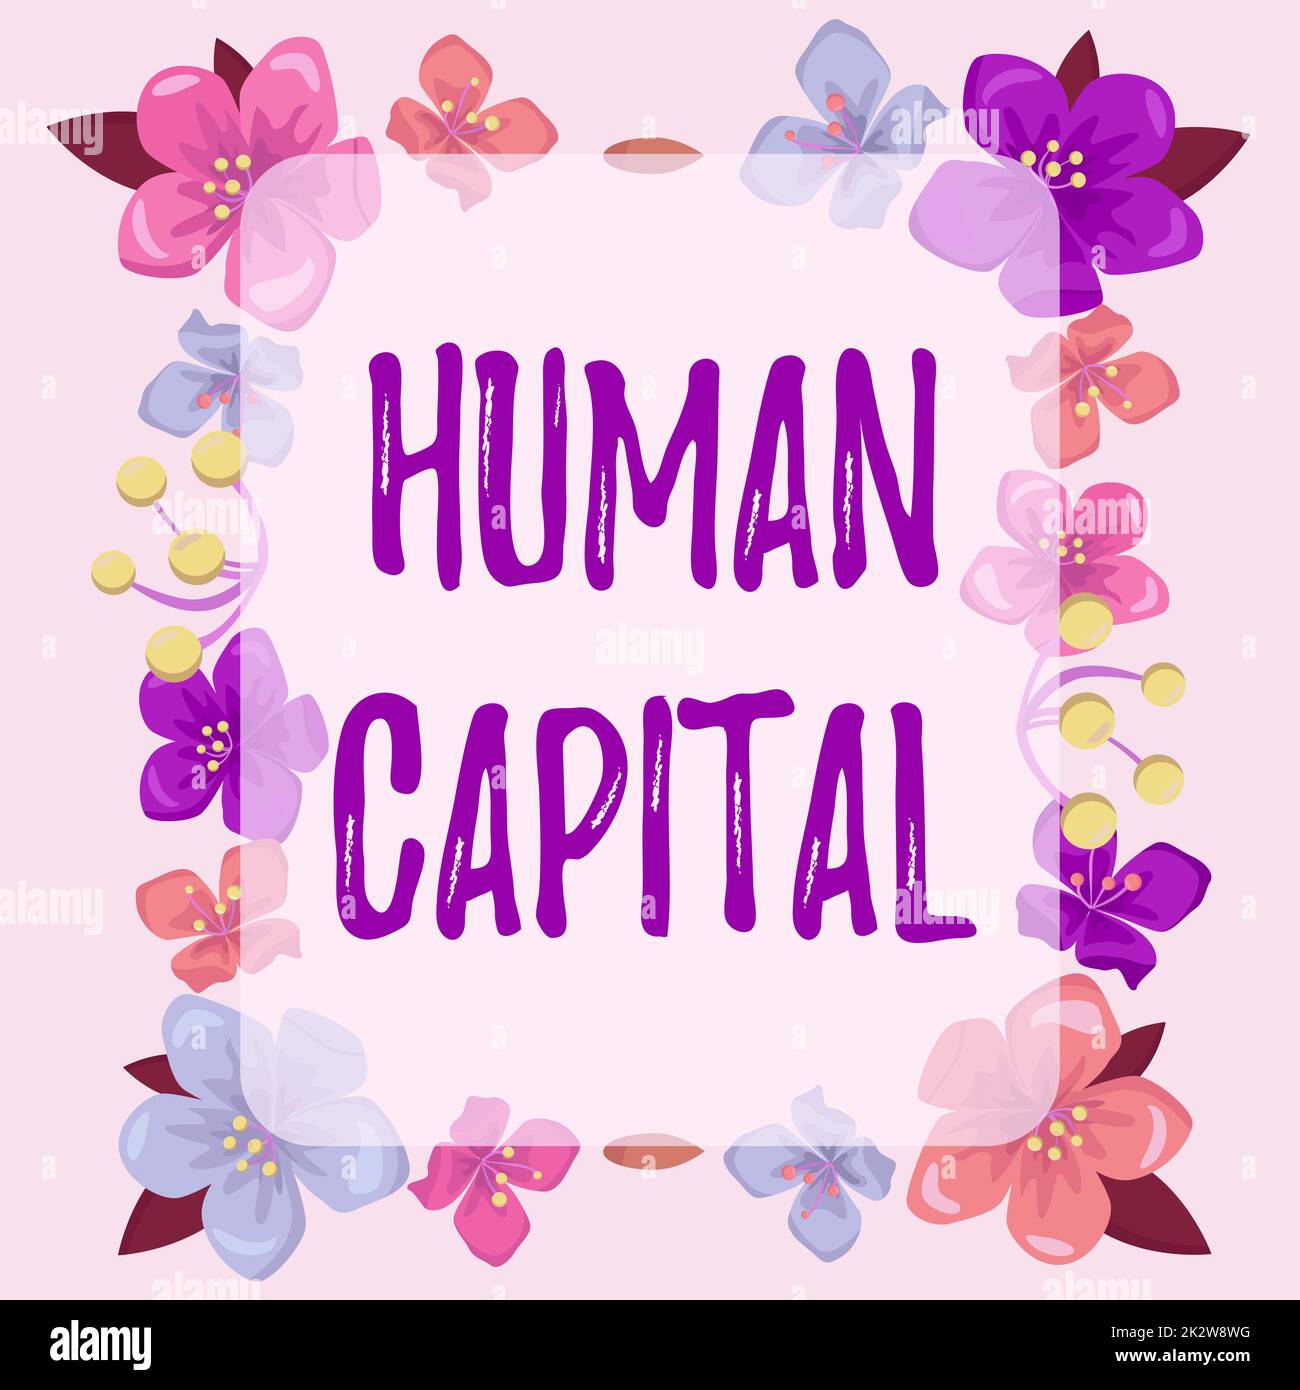 Hand writing sign Human Capital. Internet Concept Intangible Collective Resources Competence Capital Education Frame decorated with colorful flowers and foliage arranged harmoniously. Stock Photo